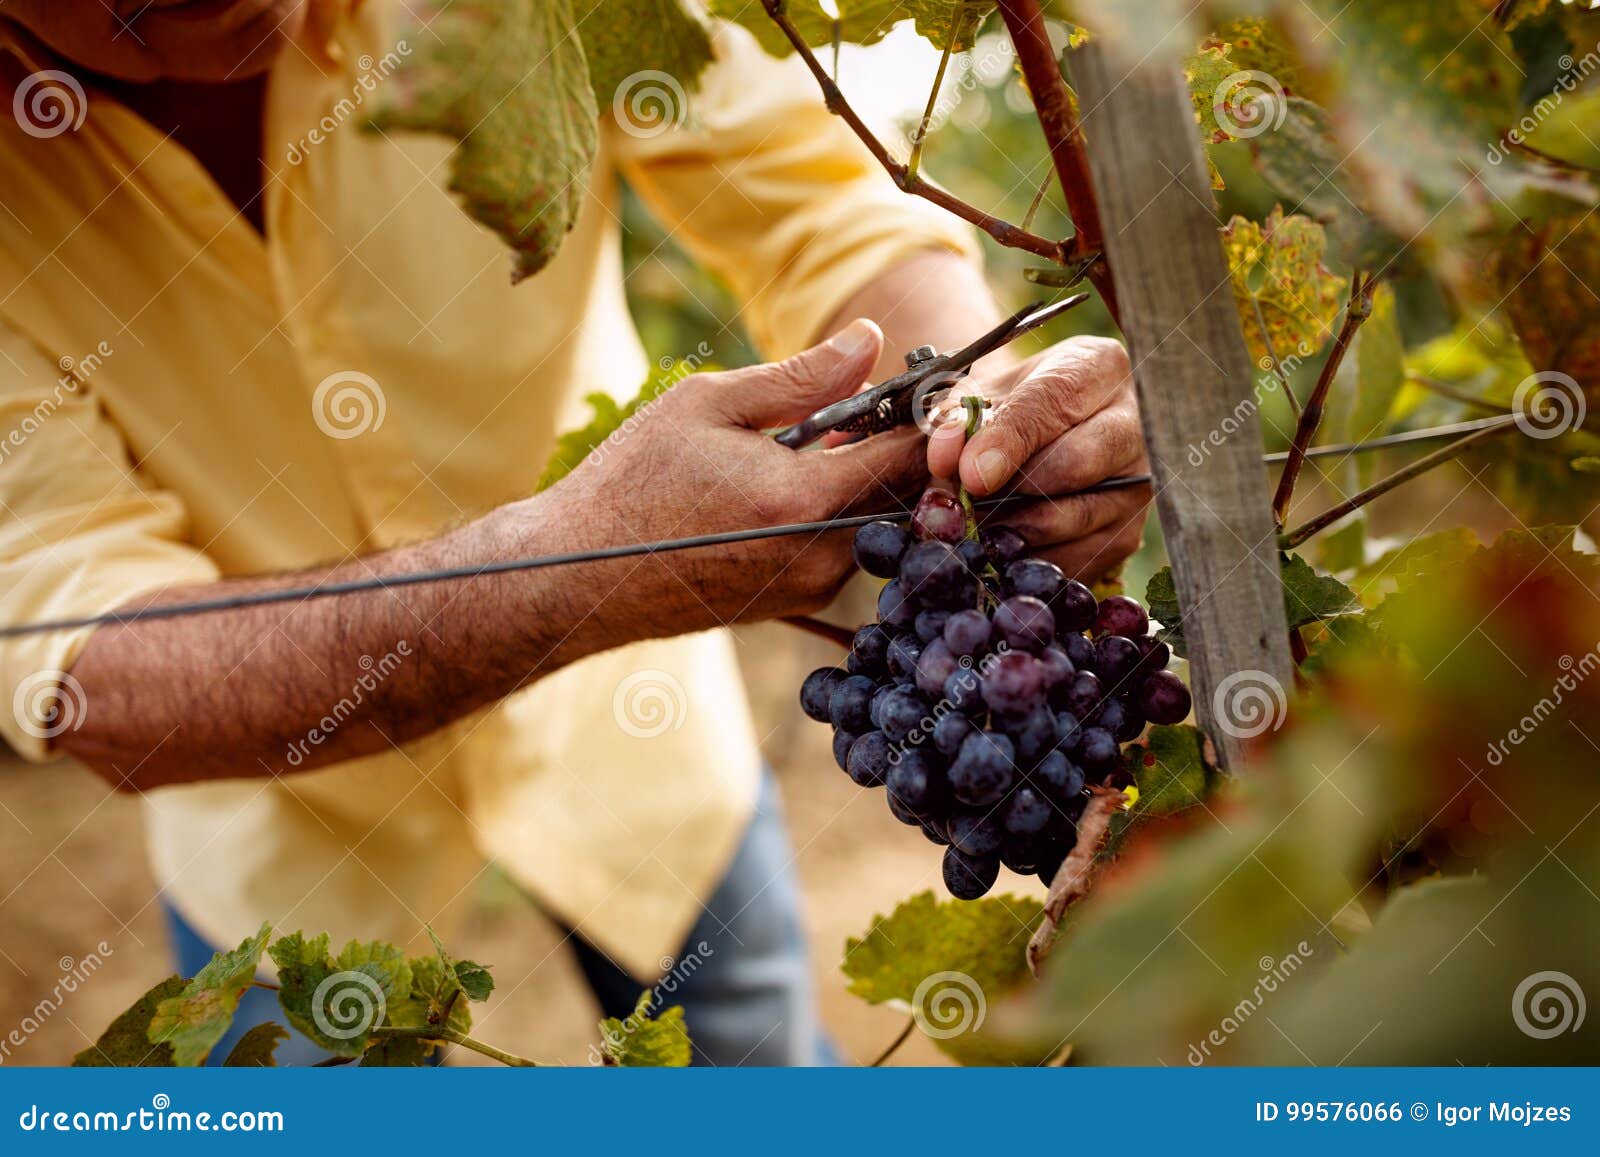 close-up man picking red wine grapes on vine